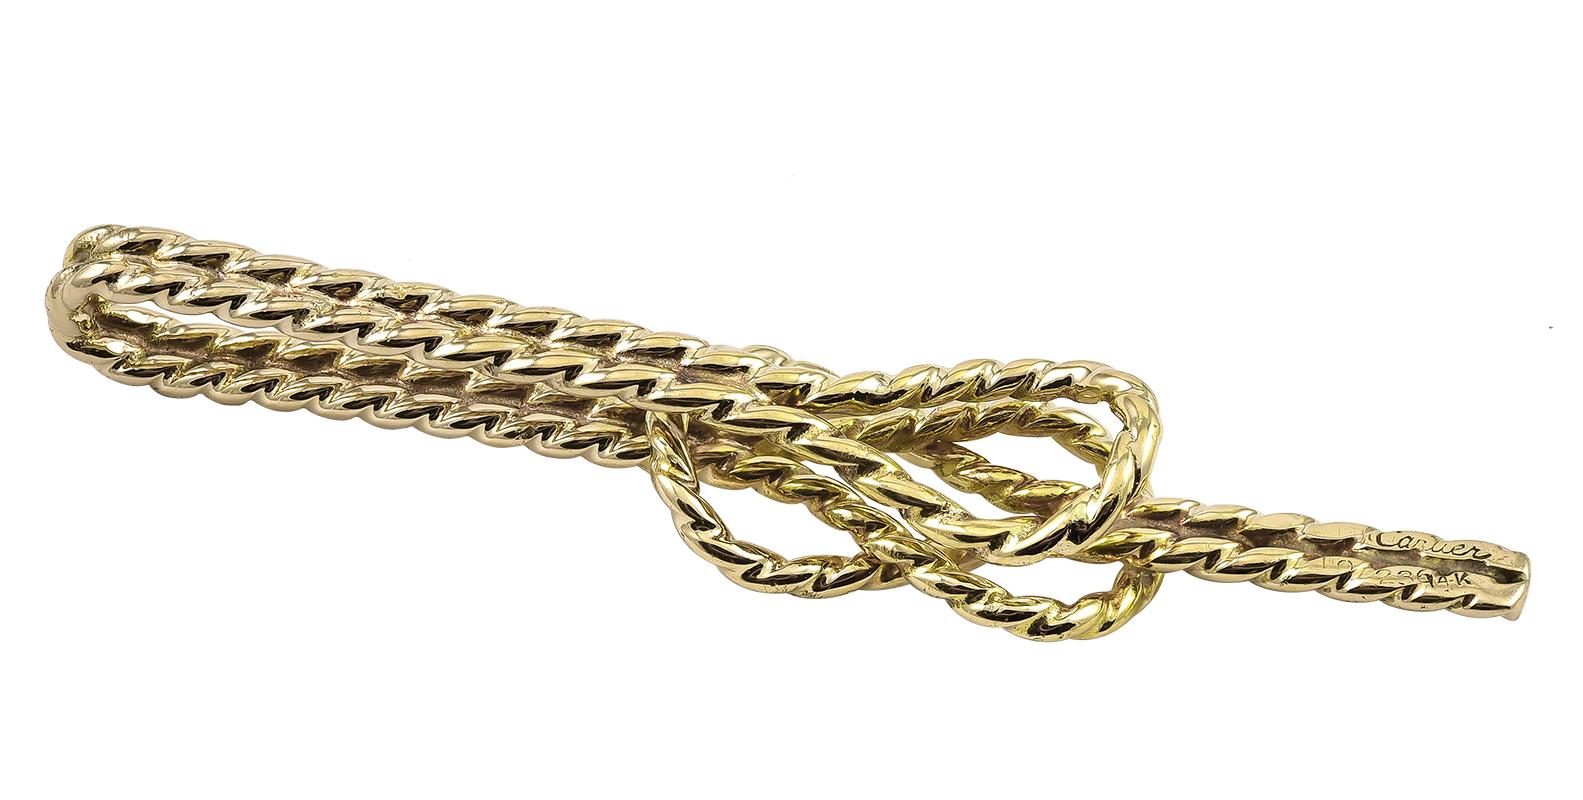 Nautical tie clip, in a rope pattern with a knot.  Made and signed by CARTIER.  Heavy gauge 14K yellow gold.  2 1/2